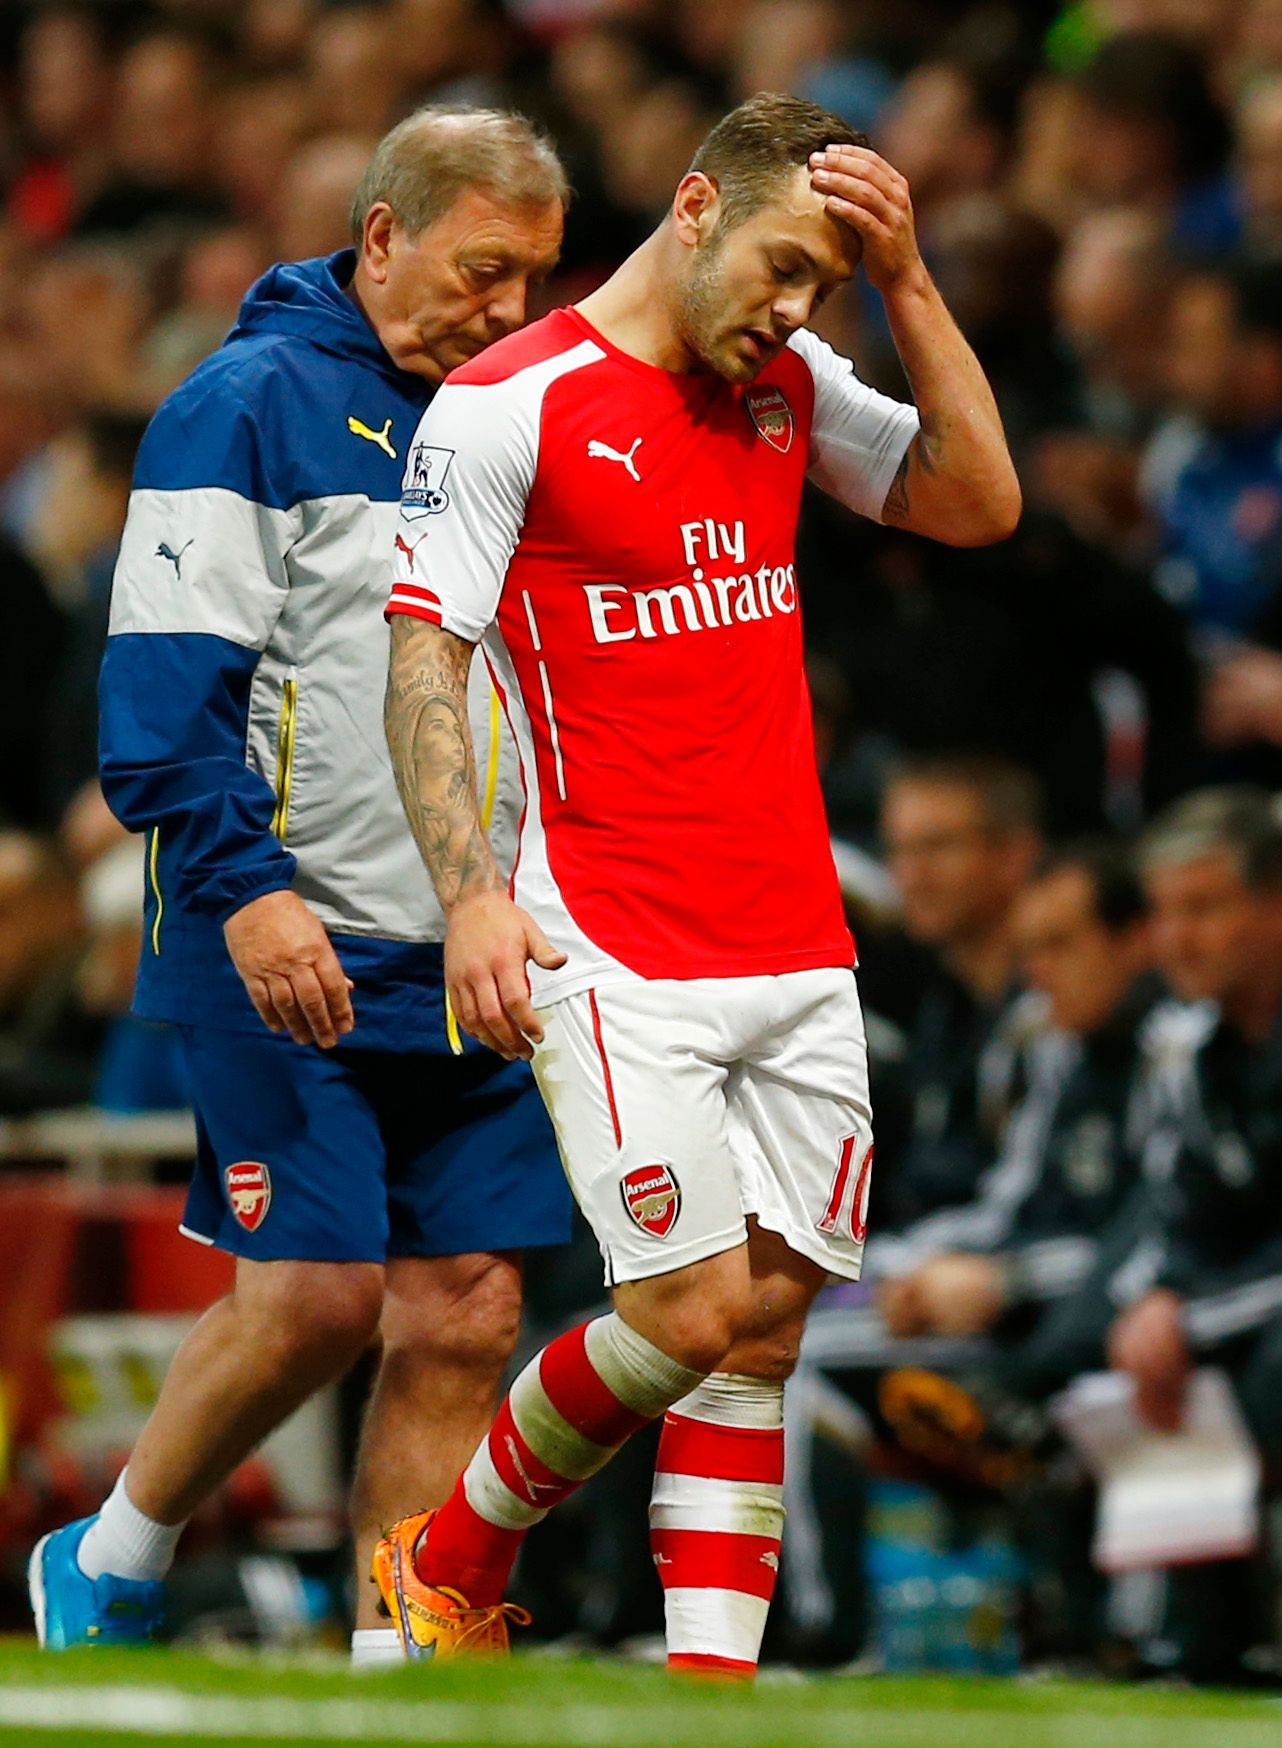 Football: Arsenal's Jack Wilshere looks dejected as he is substituted